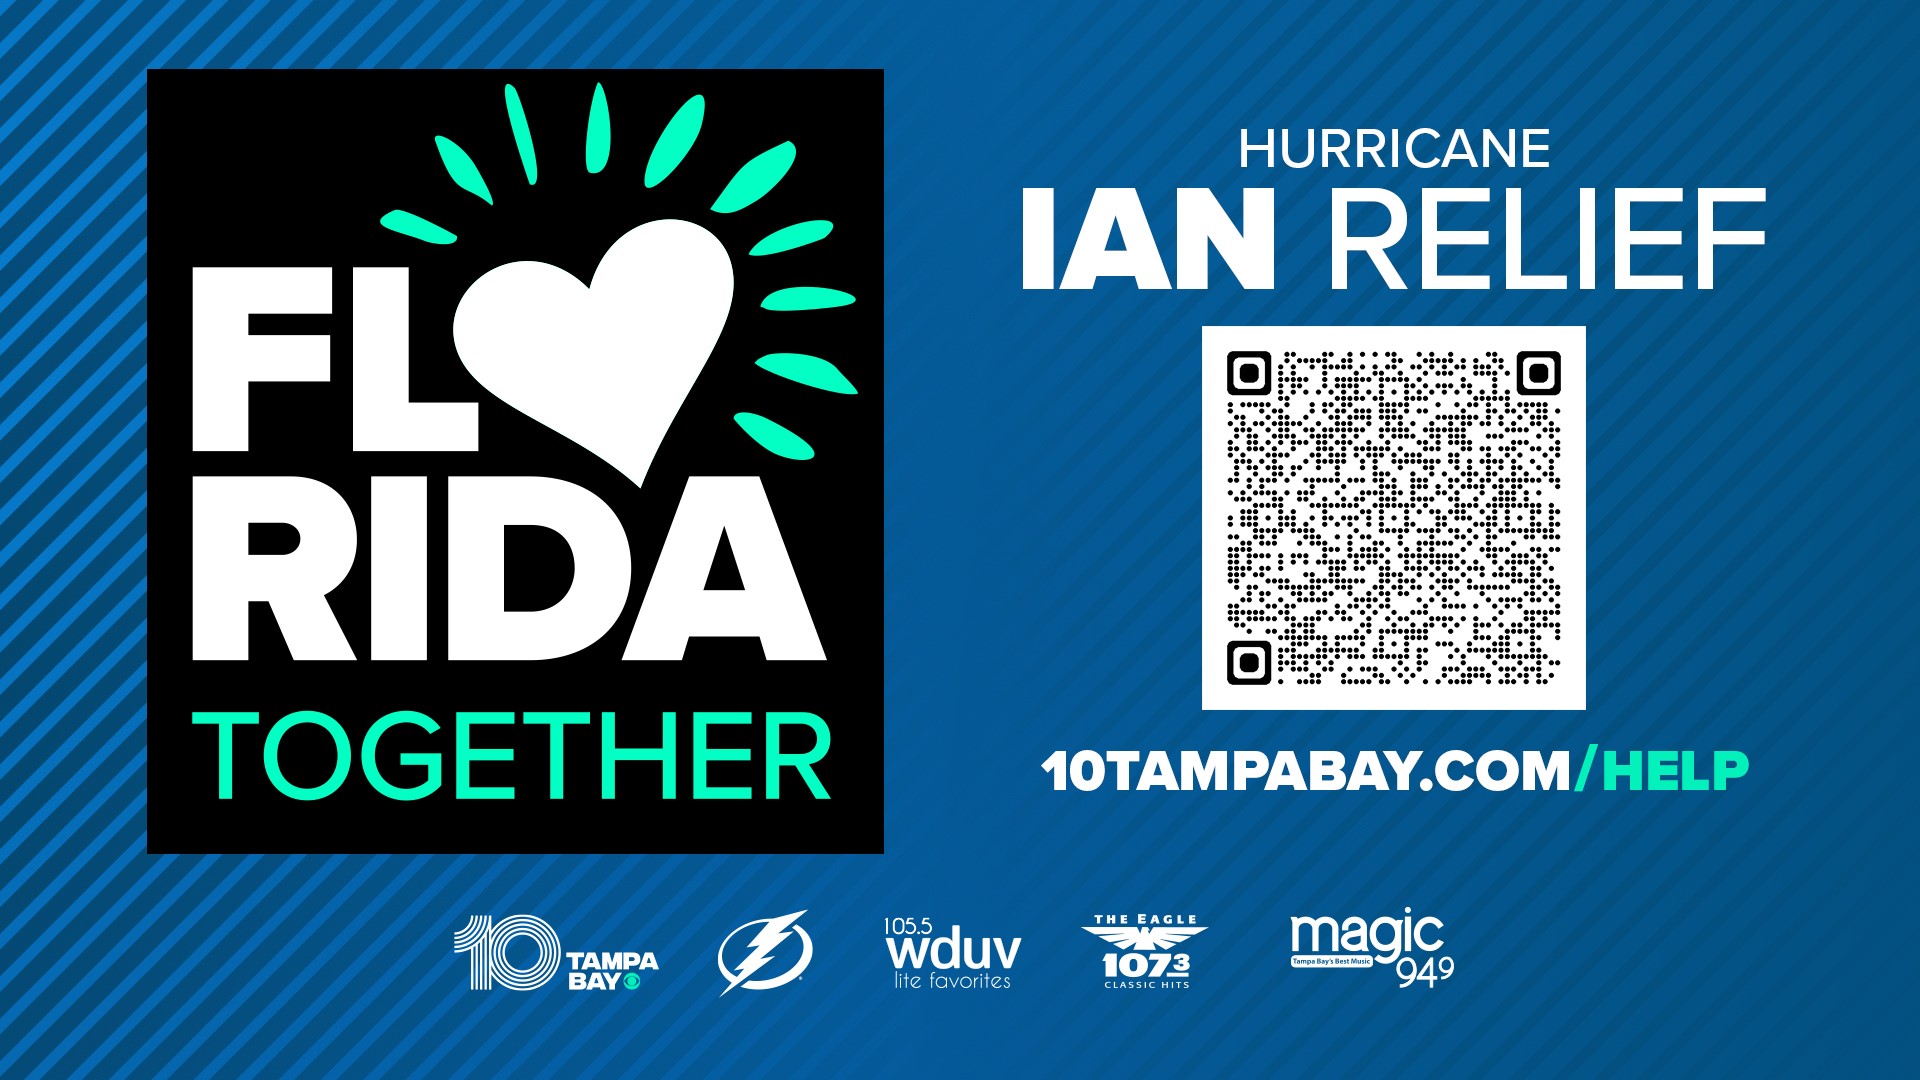 Now through Saturday, you can stop by and donate supplies for those affected by Hurricane Ian.